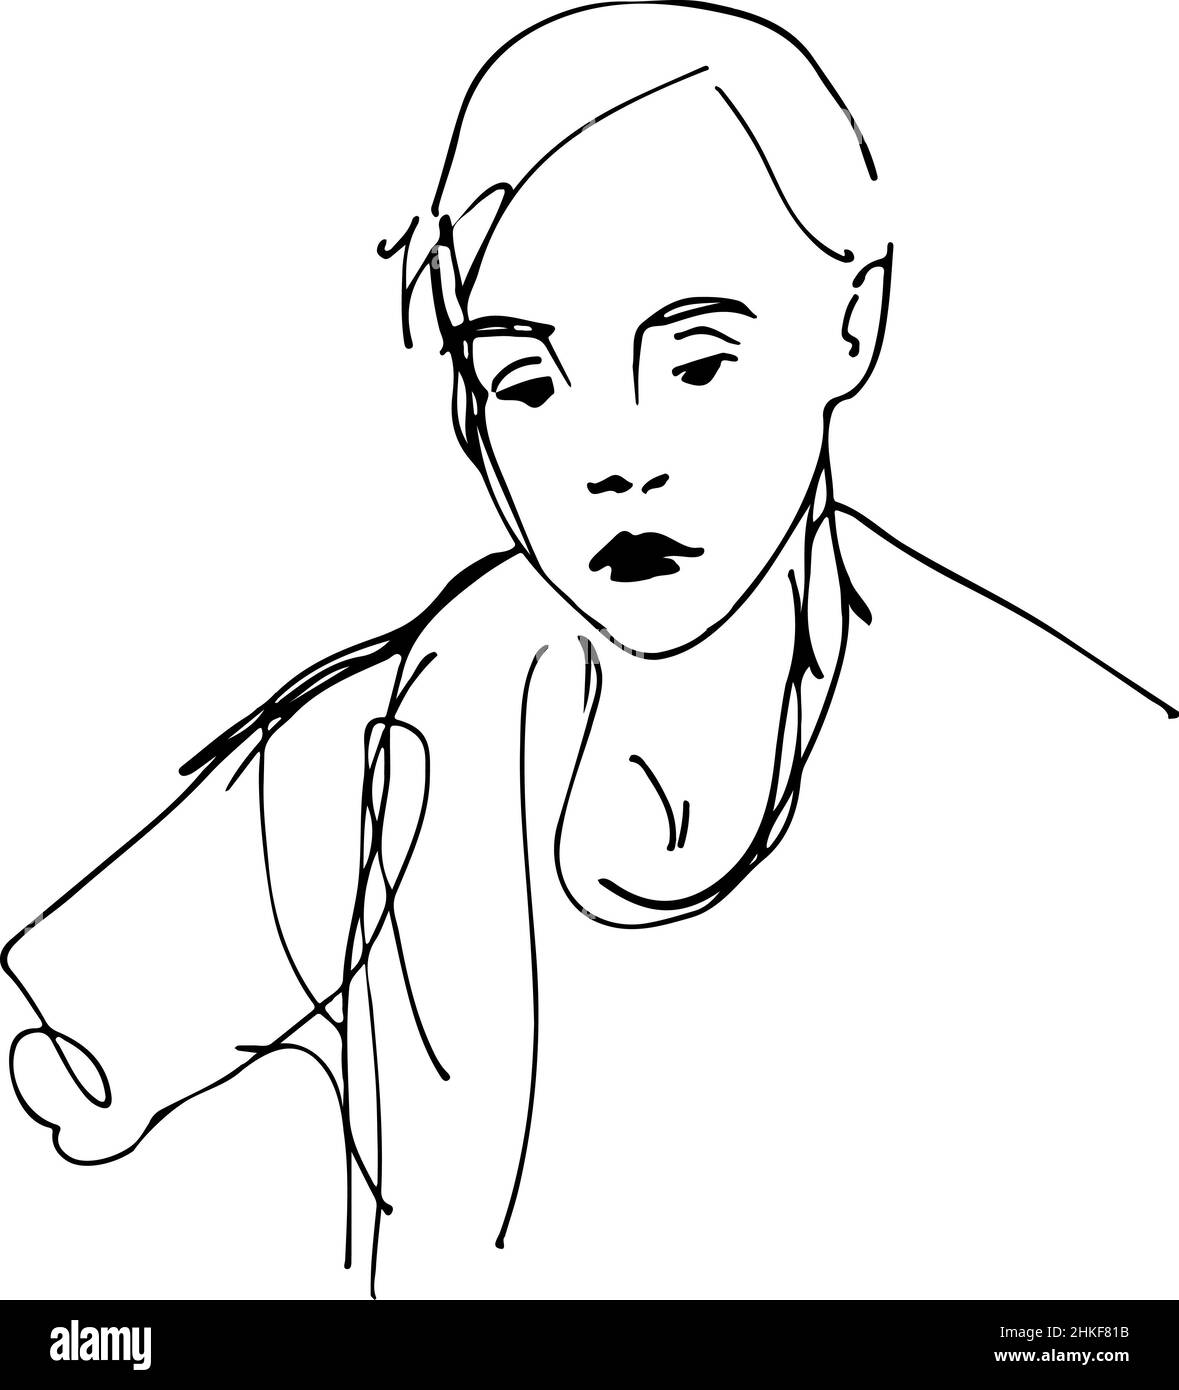 black and white sketch of a girl with a scarf Stock Photo